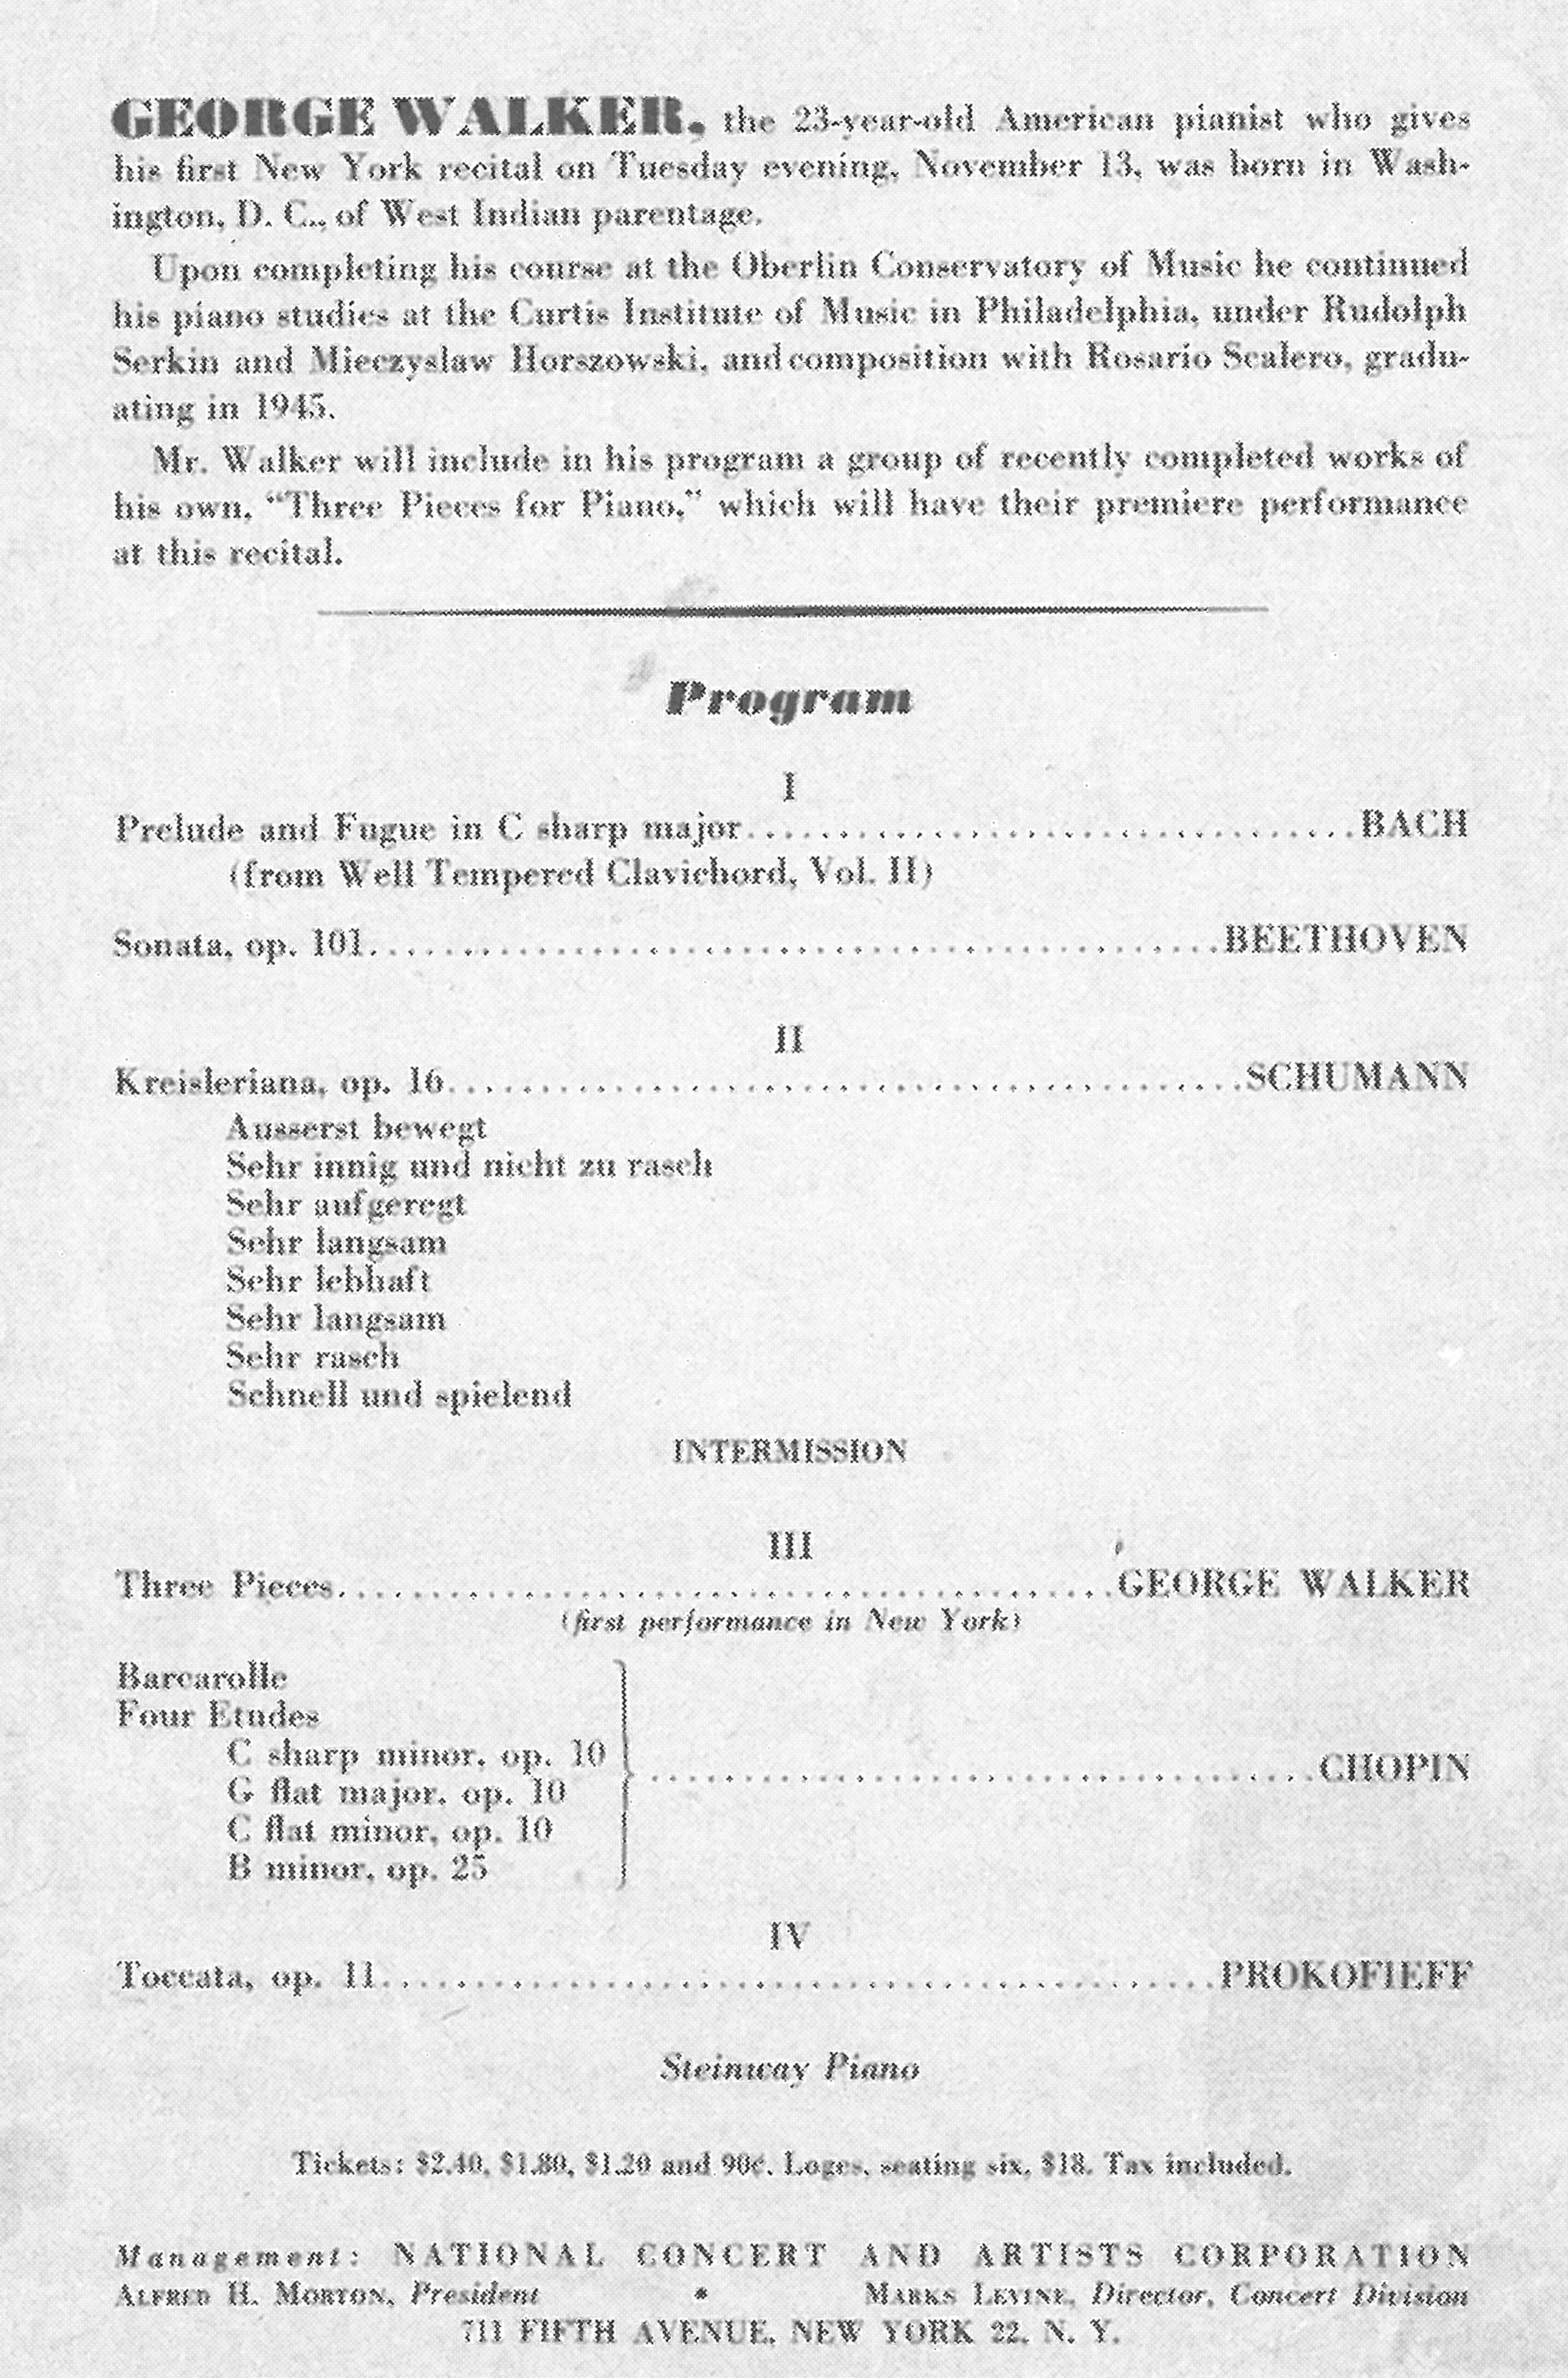 The program for George Walker's debut piano recital at New York's Town Hall: J.S. Bach's Prelude and Fugue in C-sharp minor from WTC Bk II; Beethoven's Sonata opus 101; Robert Schumann's Kreisleriana; (intermission); three pieces by Walker (receiving their world premiere performances); Chopin's Barcarolle plus four etudes (C-sharp minor, G-flat major, G-flat minor, and B minorf); and Prokofieff's Toccata, opus 11.